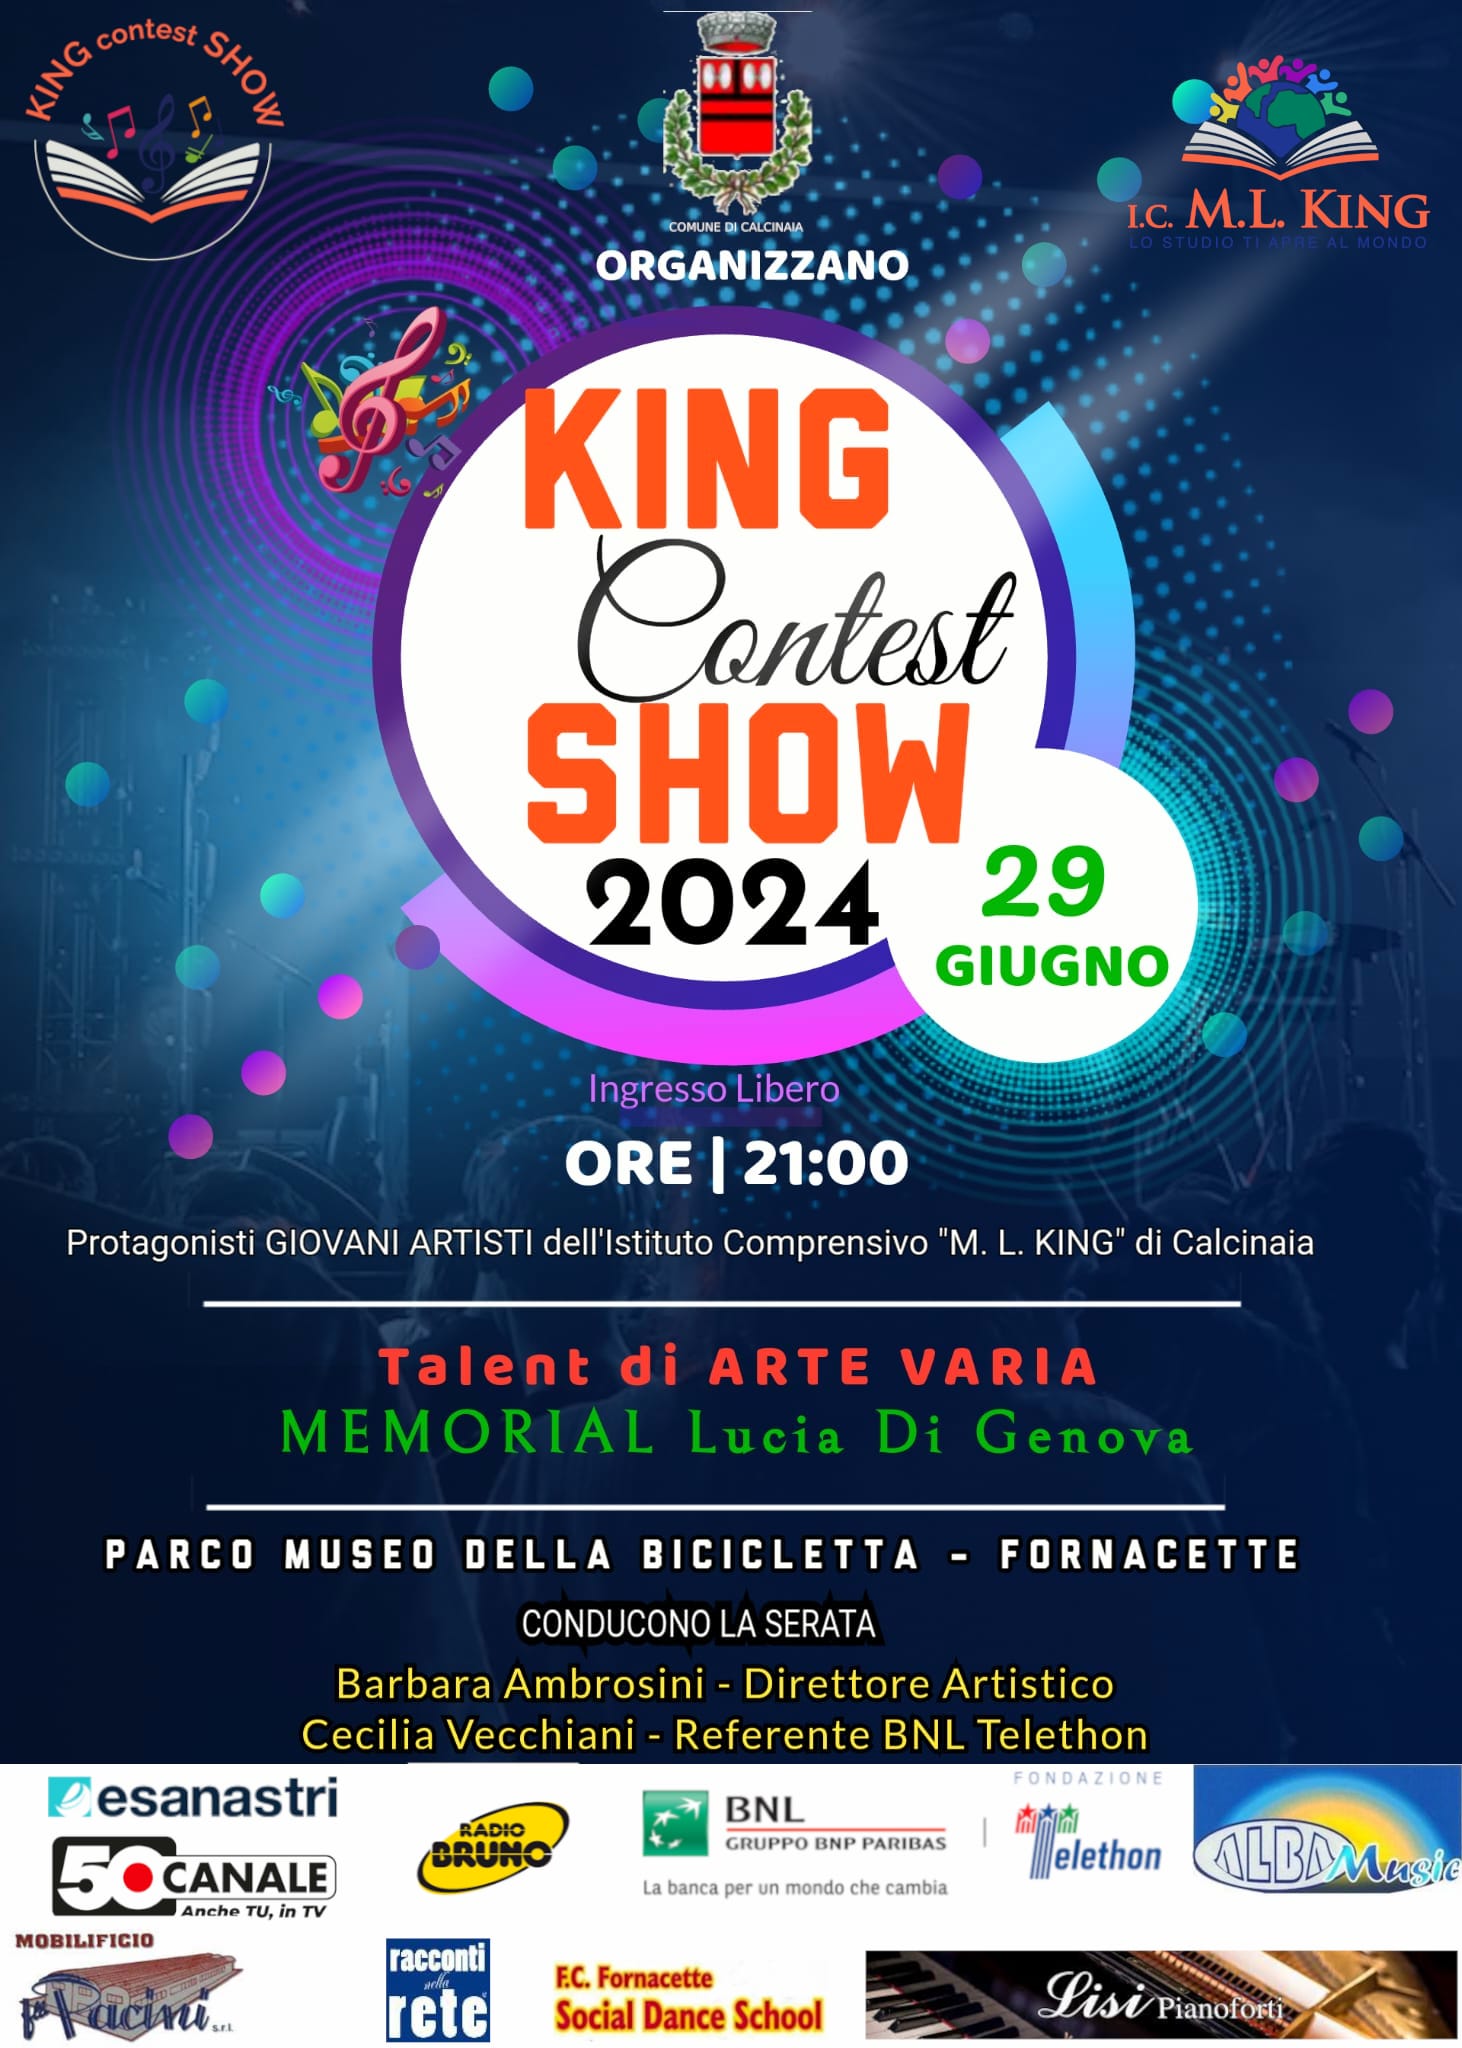 King Contest Show 2024